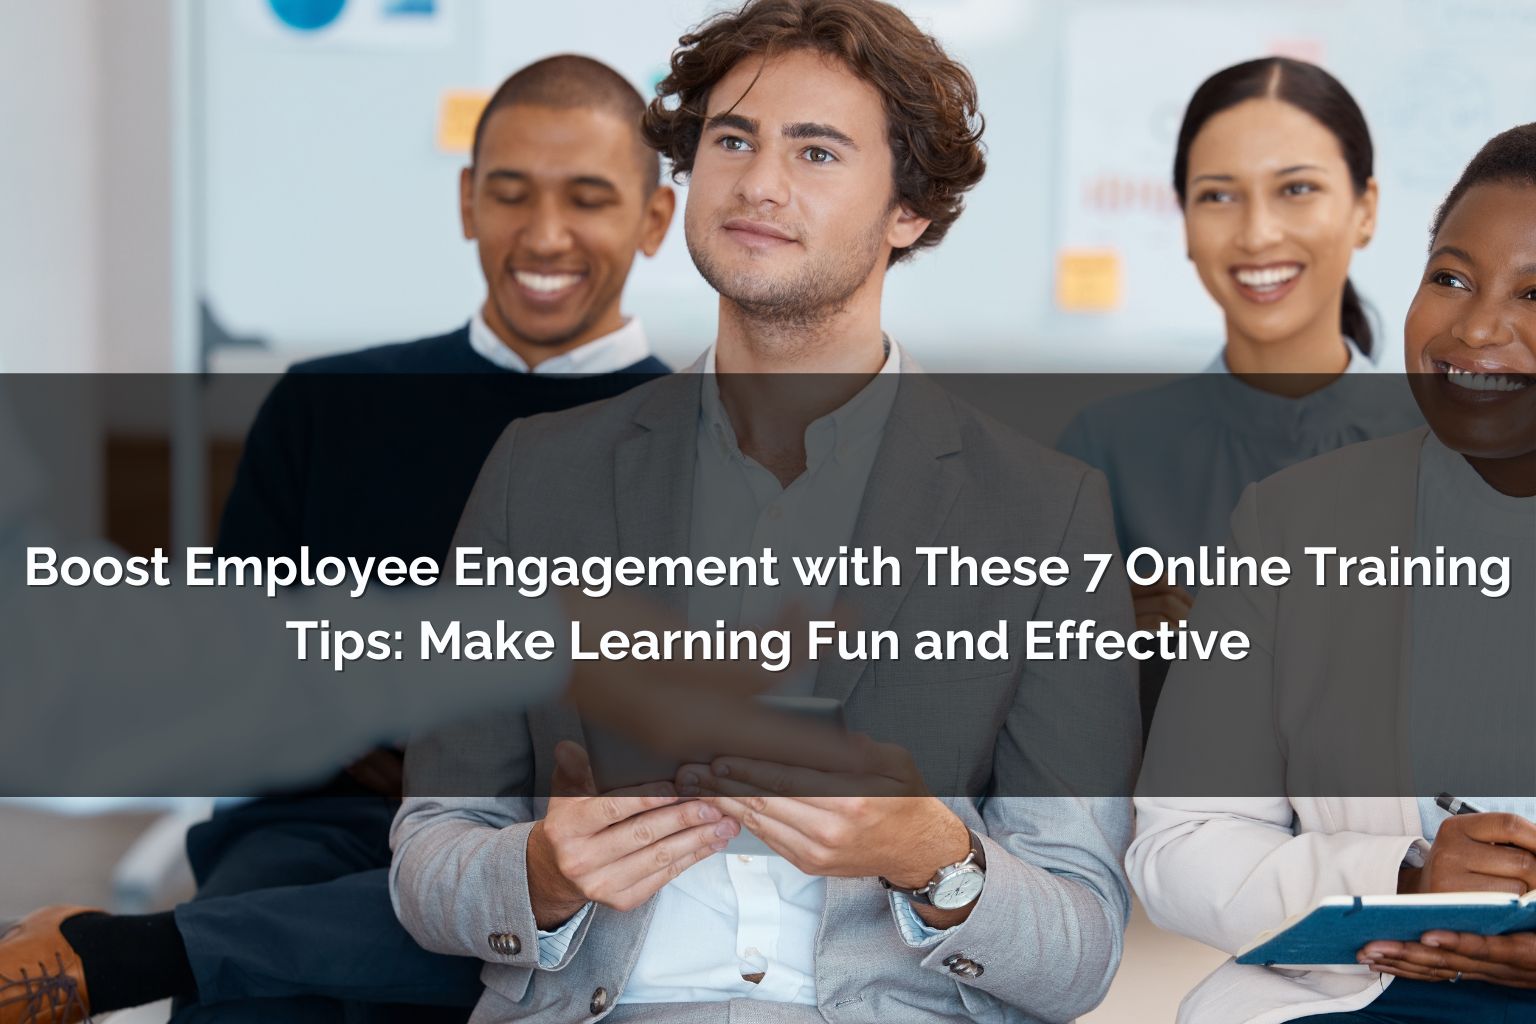 7 online training tips to boost employee engagement - Poncho eLearning